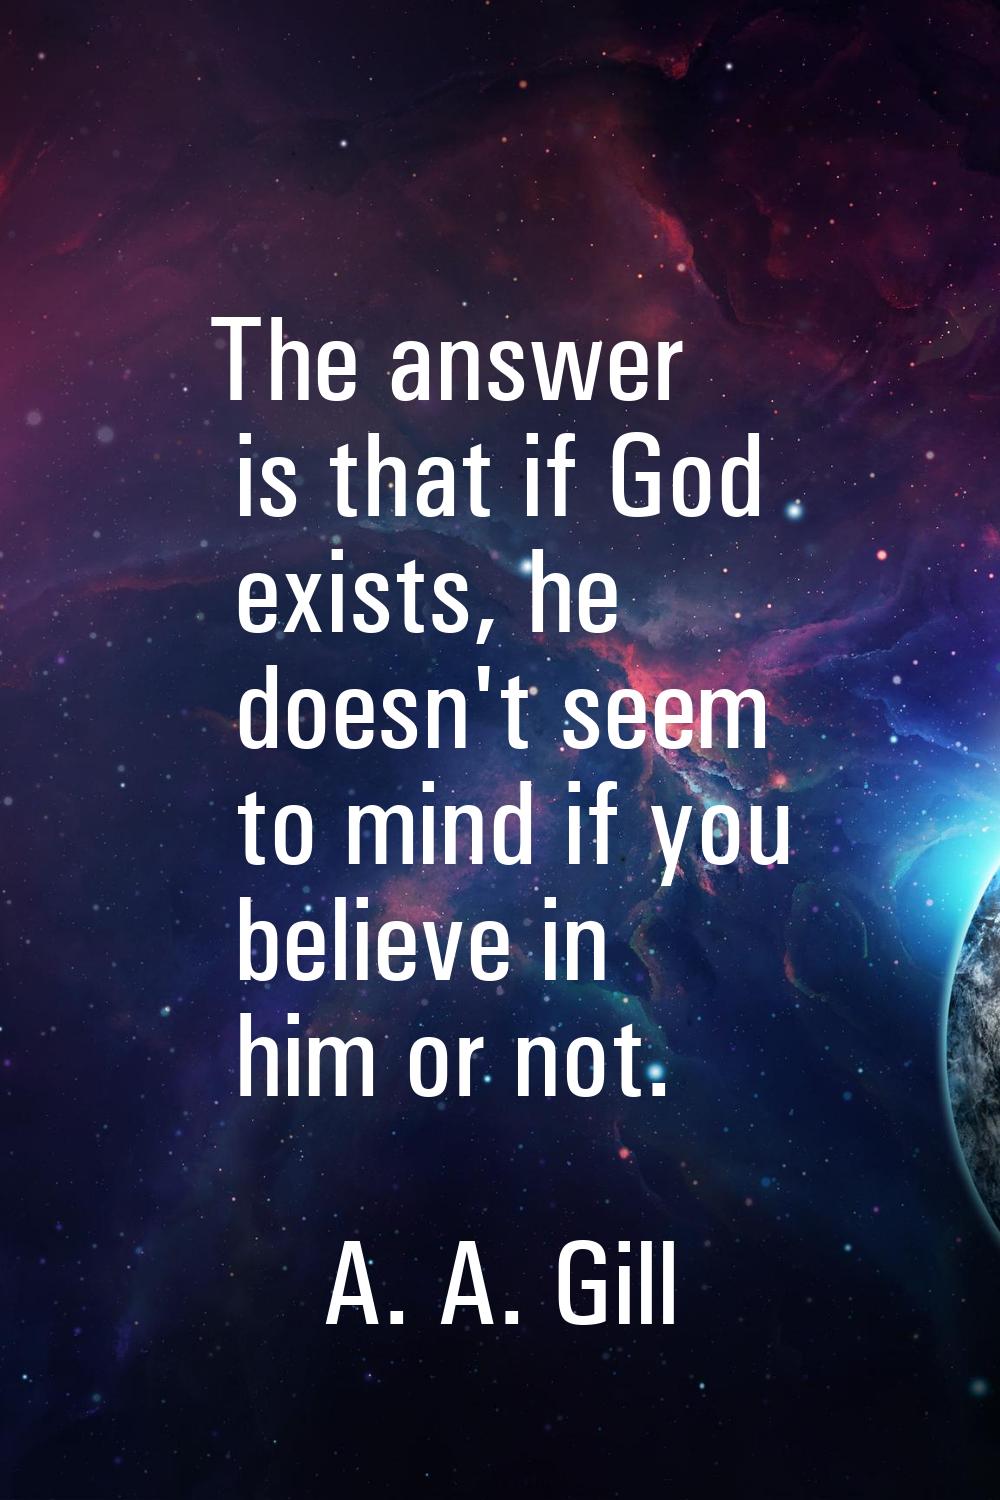 The answer is that if God exists, he doesn't seem to mind if you believe in him or not.